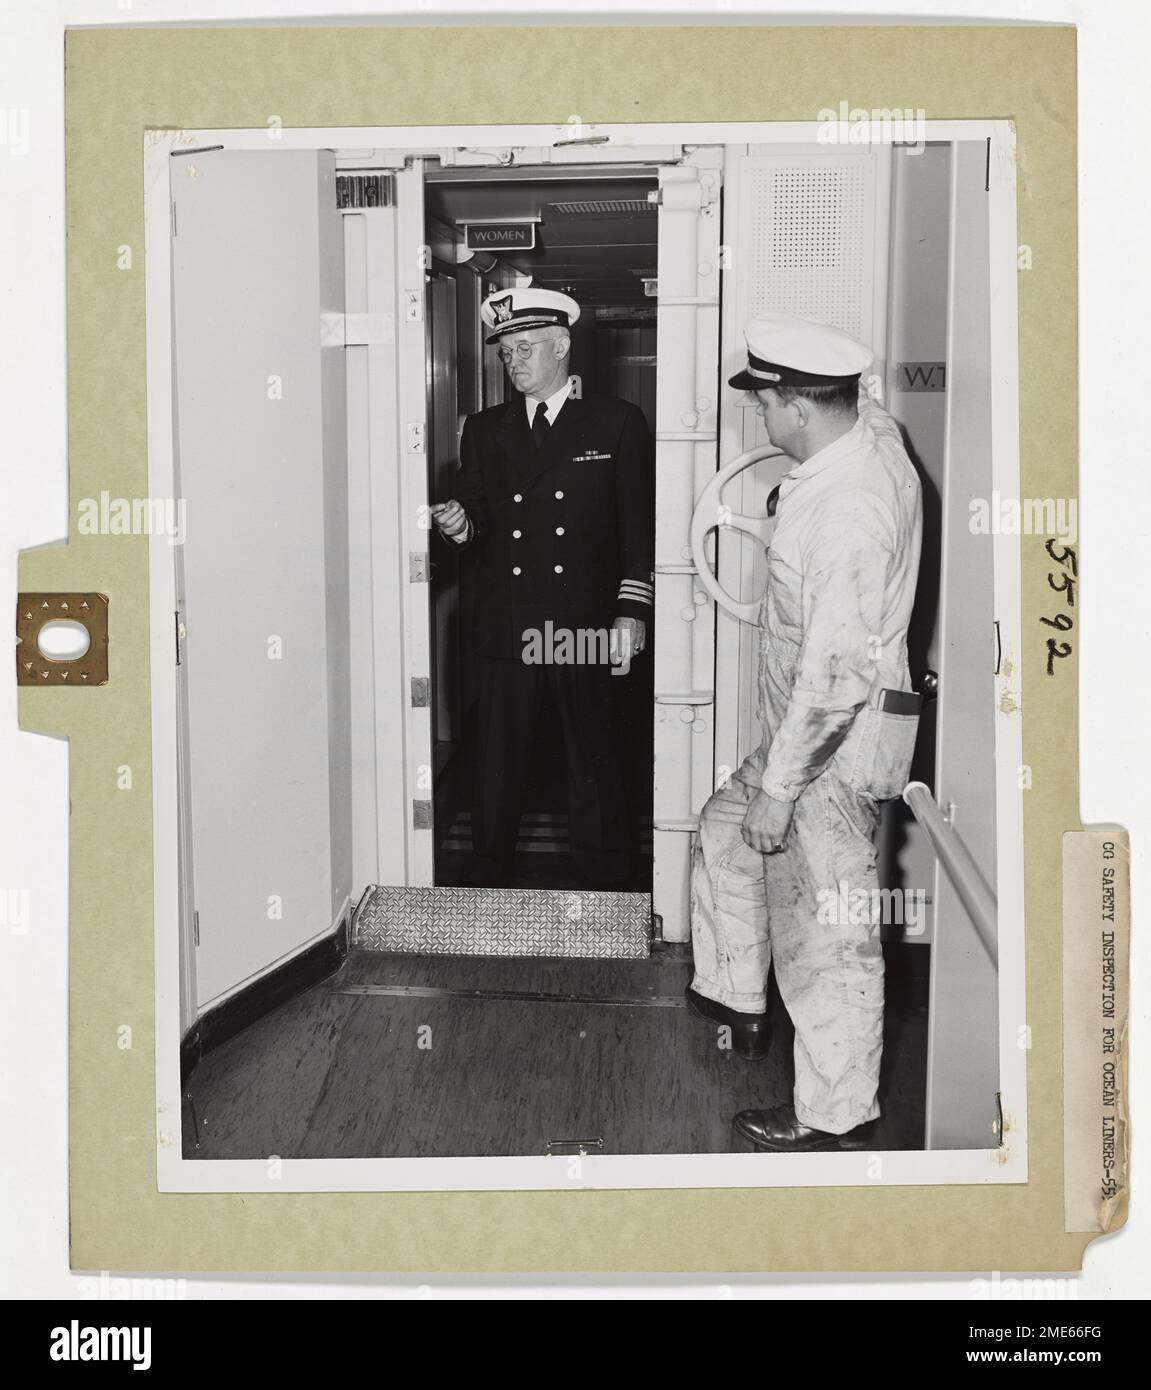 Coast Guard Safety Inspections for Ocean Liners. Commander Paul H. Brown (left), USCG, joins Lieutenant (jg) Frederick O. Wooley below decks to check closure of watertight doors. Here, they seal the door by local control to insure its operation in case of failure of the master control system. As the heavy door slowly meshes closed, a warning alarm sounds in the passageway. The door, which limits flooding to a small controllable area, closes with sufficient force to cut off a stream of flooding mater or cut through debris that might jam in the doorway. Stock Photo